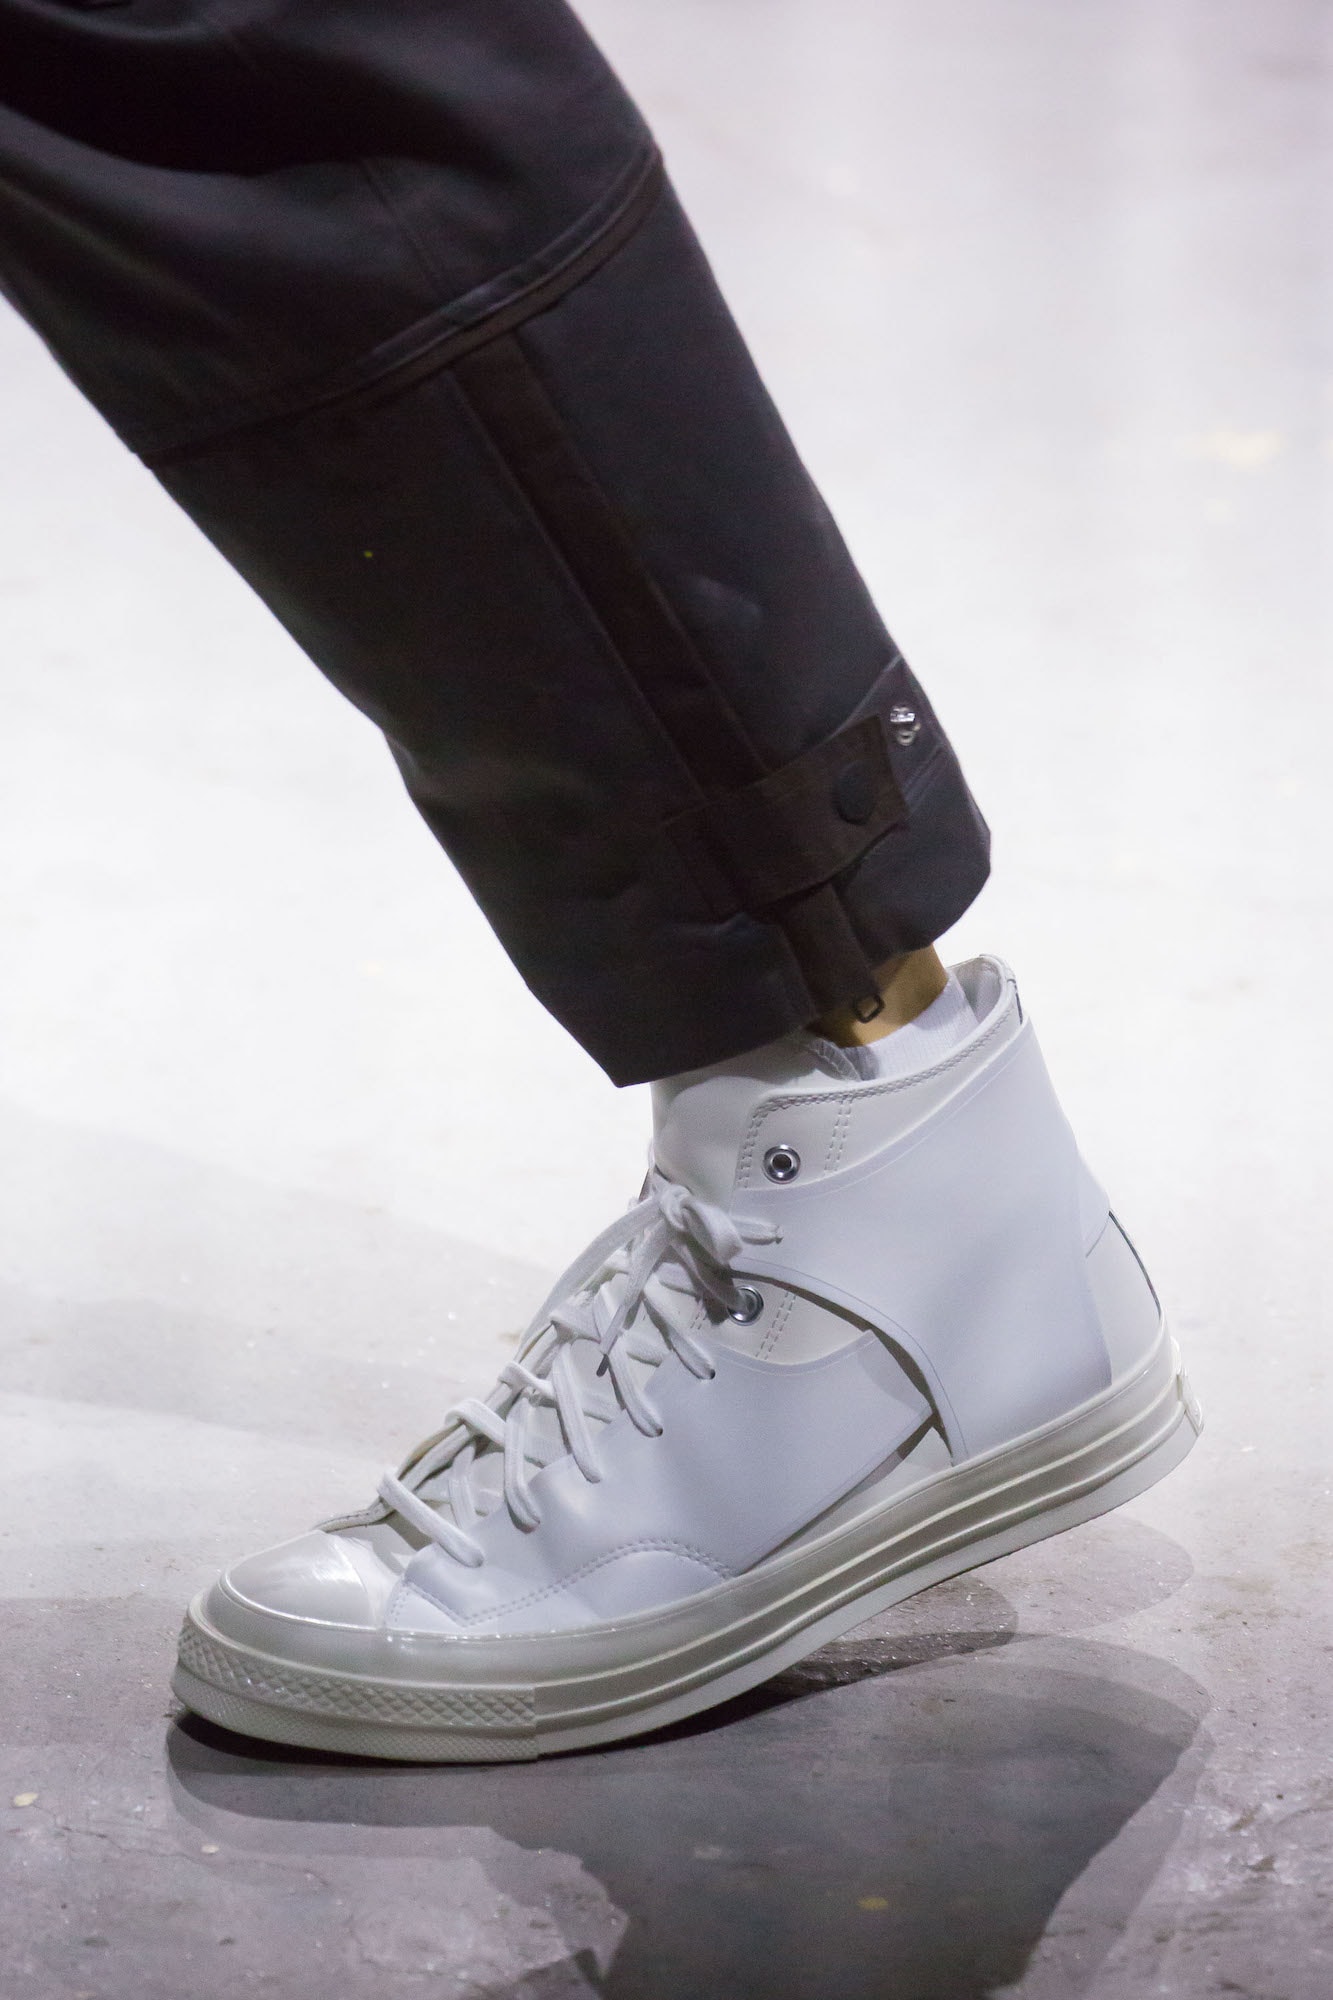 Feng Chen Wang Debuts New Converse Collaboration Shanghai Fashion Week Runway Collection Sneaker Shoe White Black Chuck Taylor One Star Jack Purcell